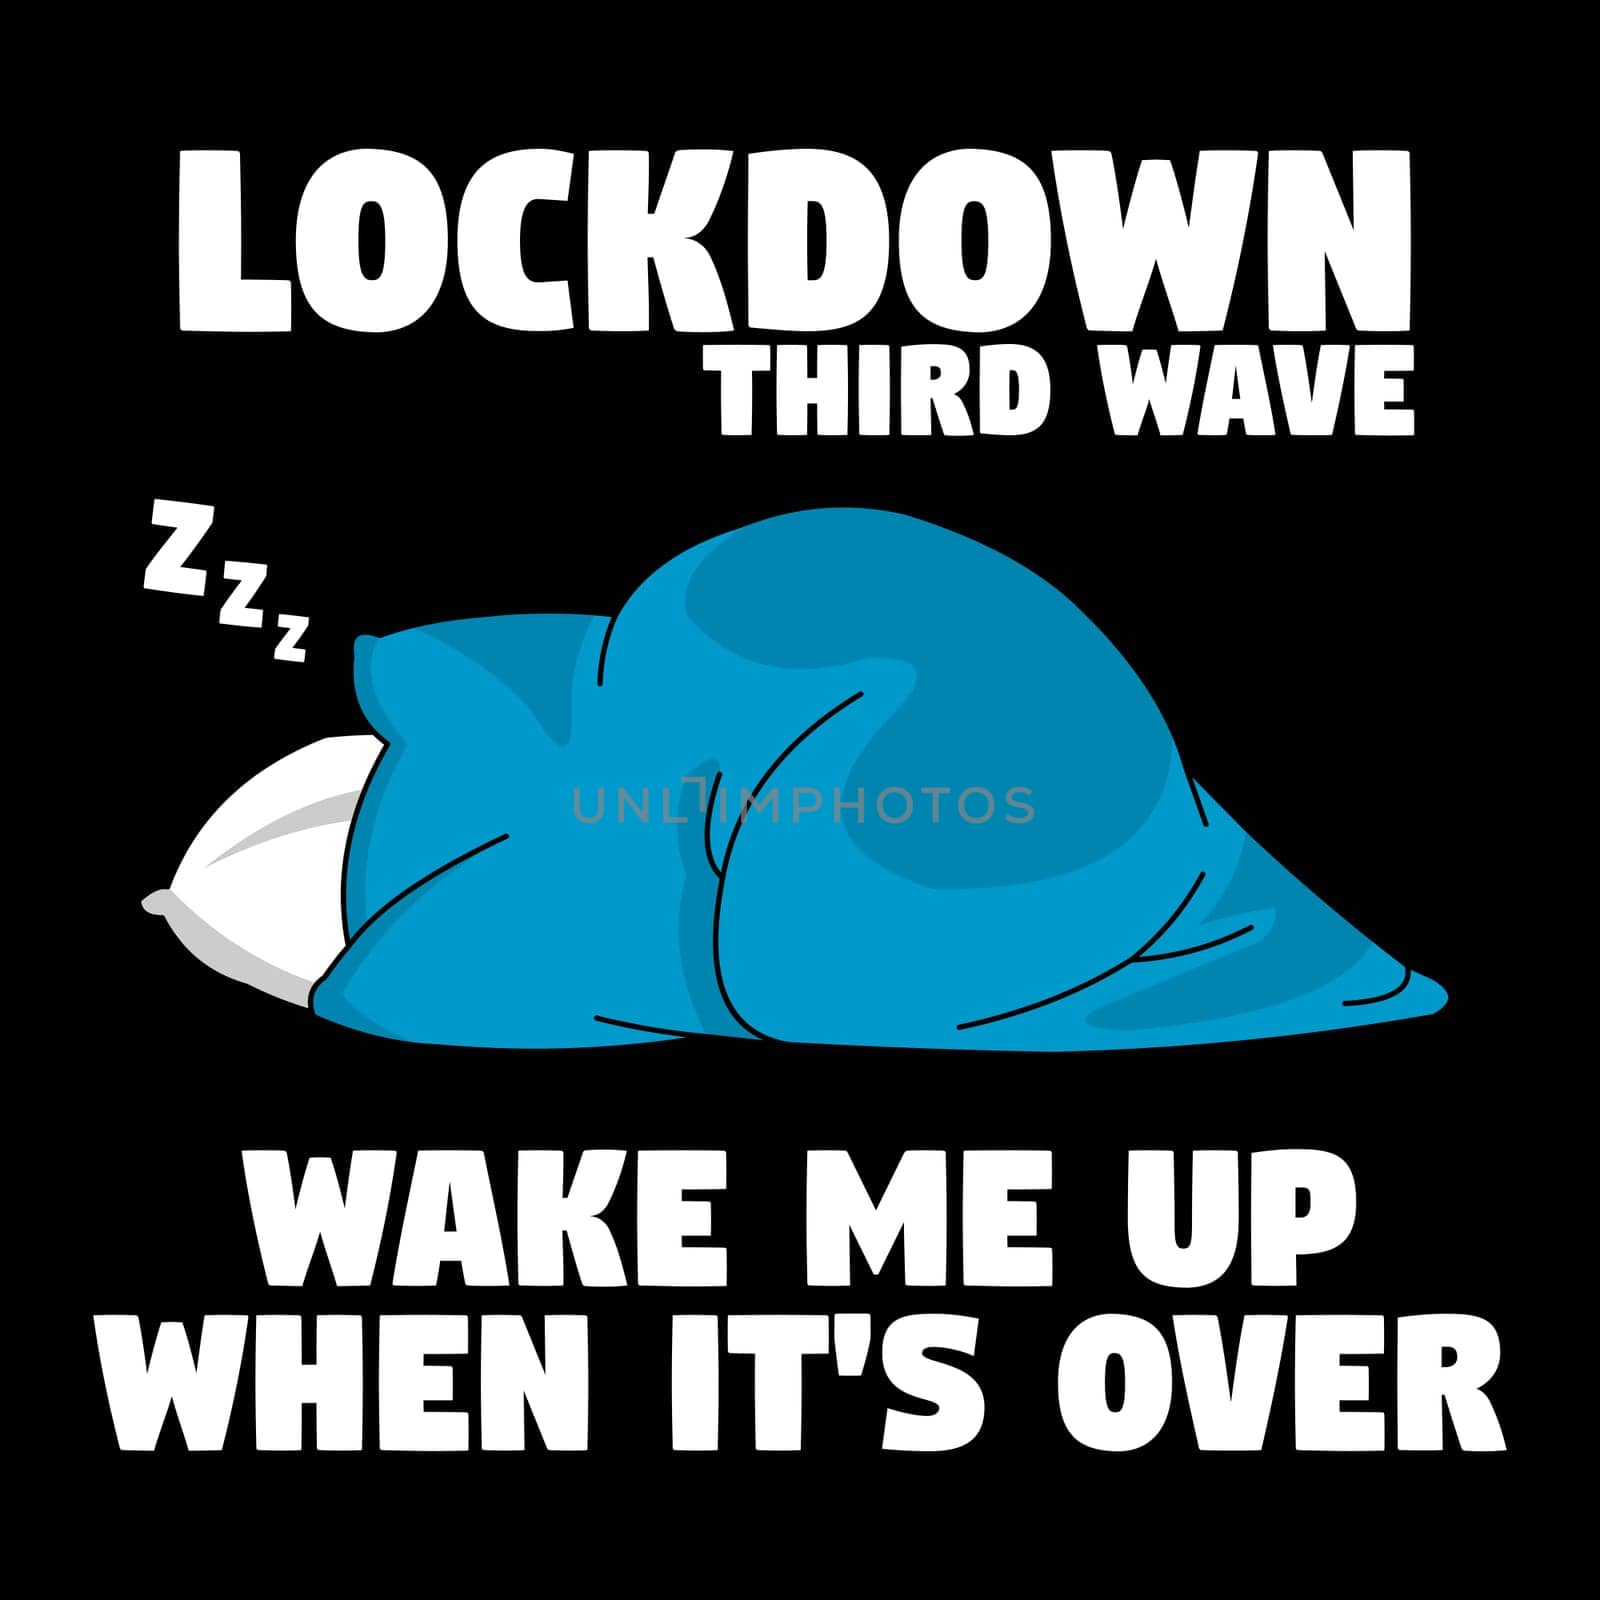 A person under the blanket wrapped up with the text "Lockdown third wave, wake me up when its over".